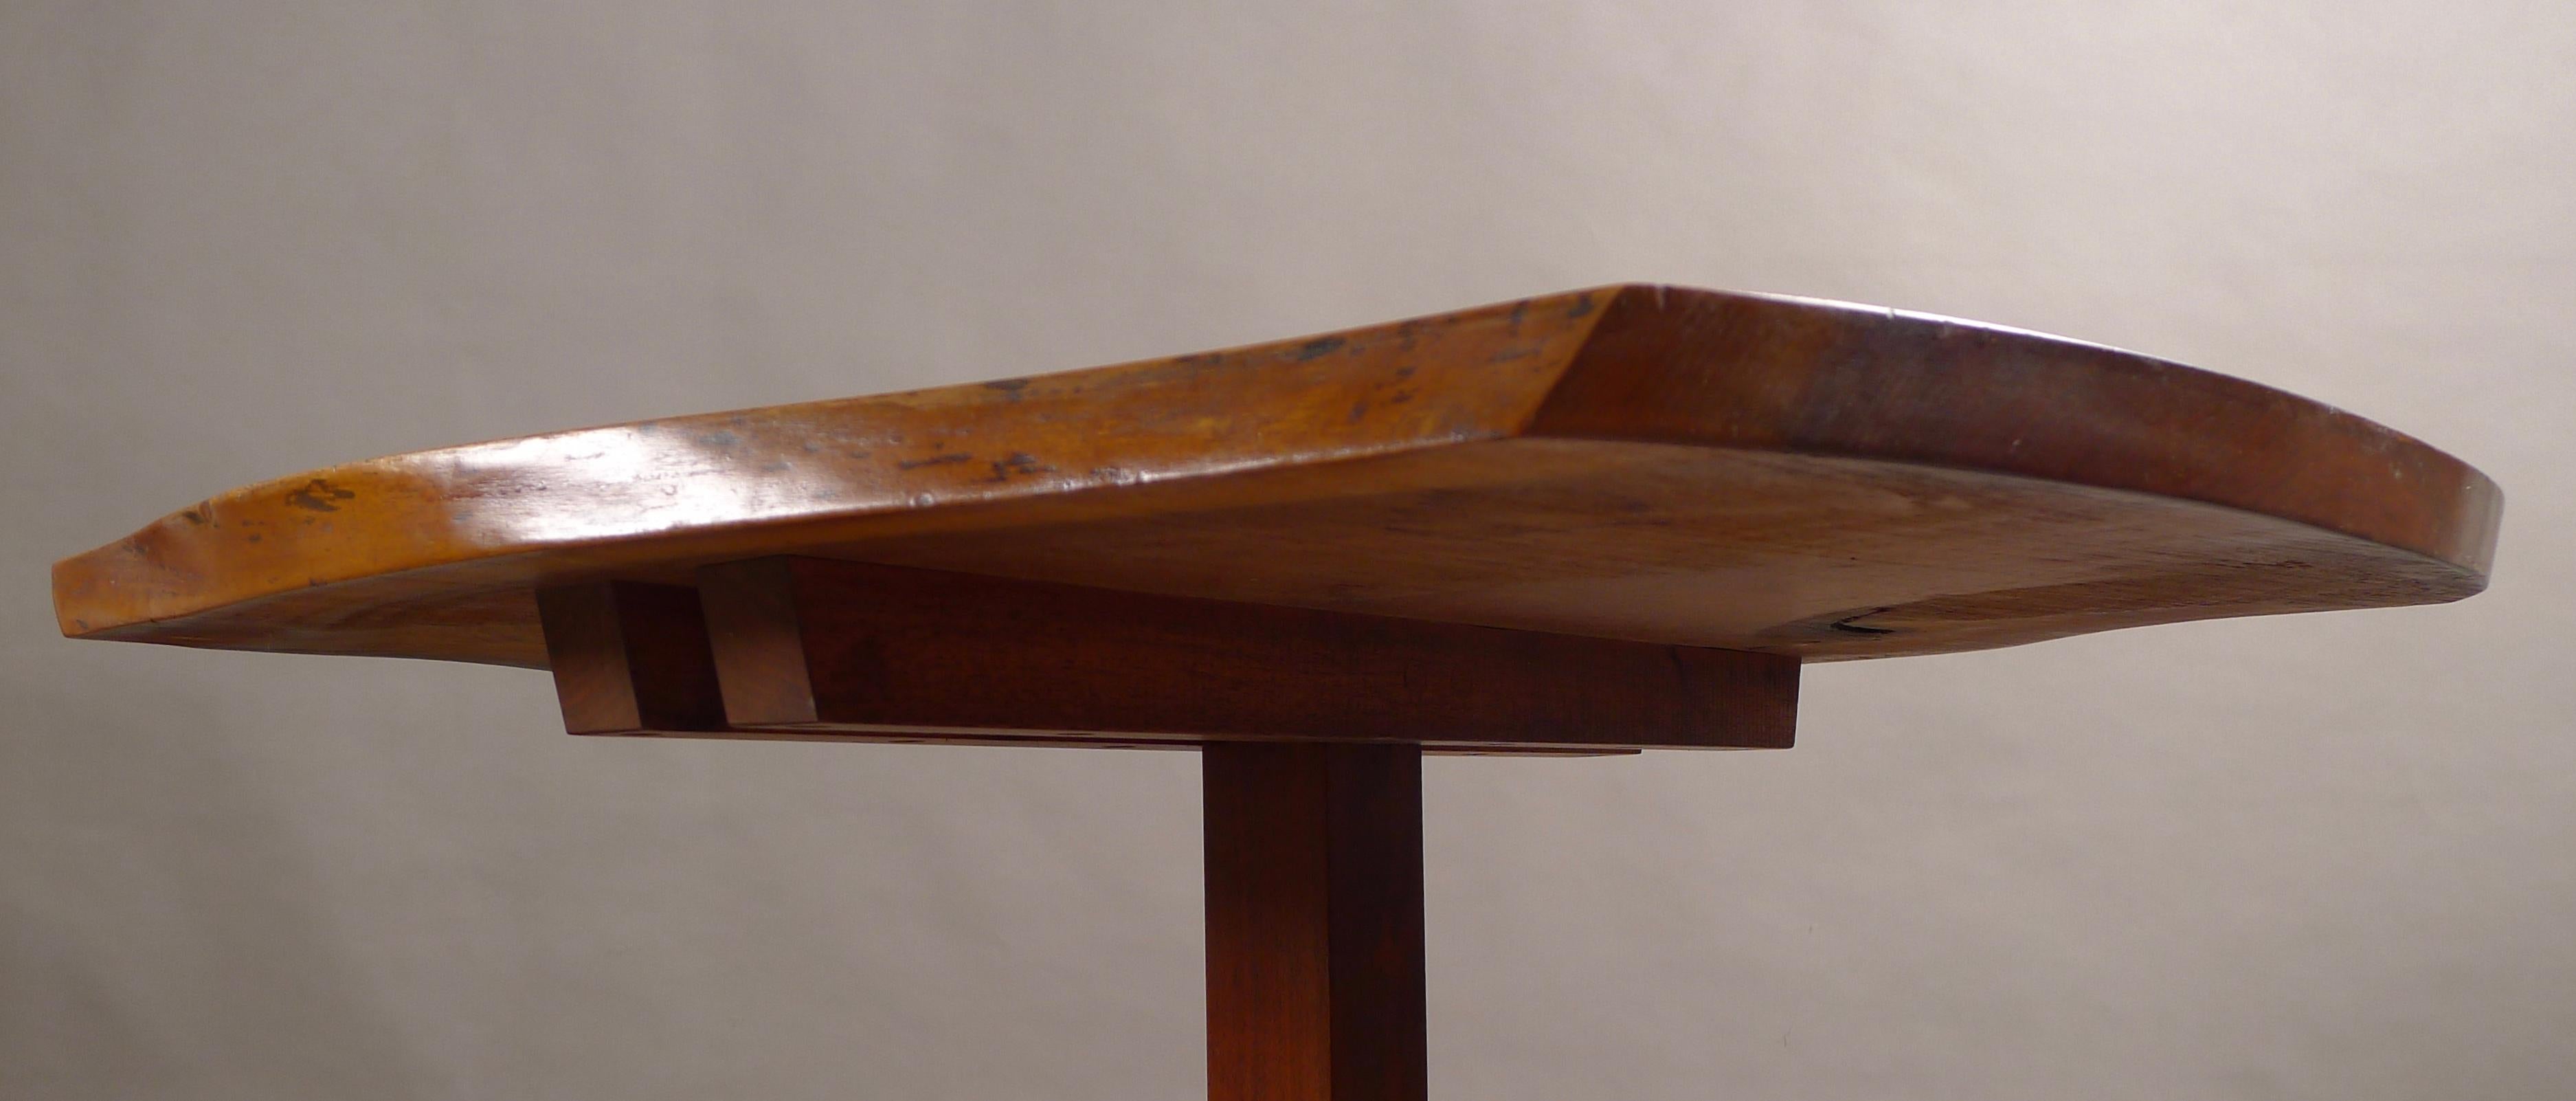 Walnut George Nakashima, End Table, 1960, Sold with Paperwork, Single Slab Top